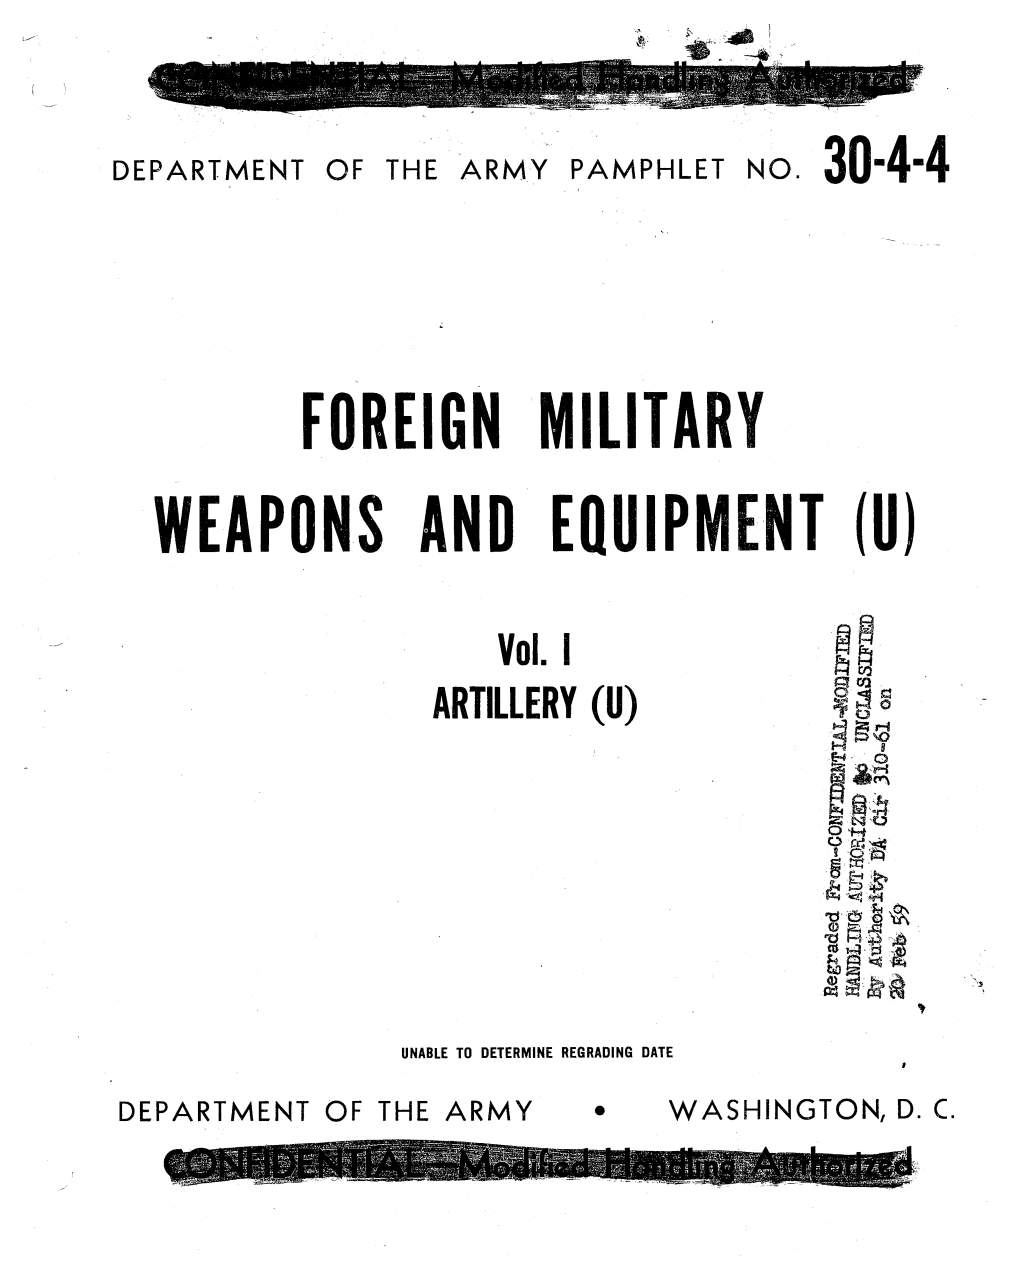 Foreign Military Weapons and Equipment U